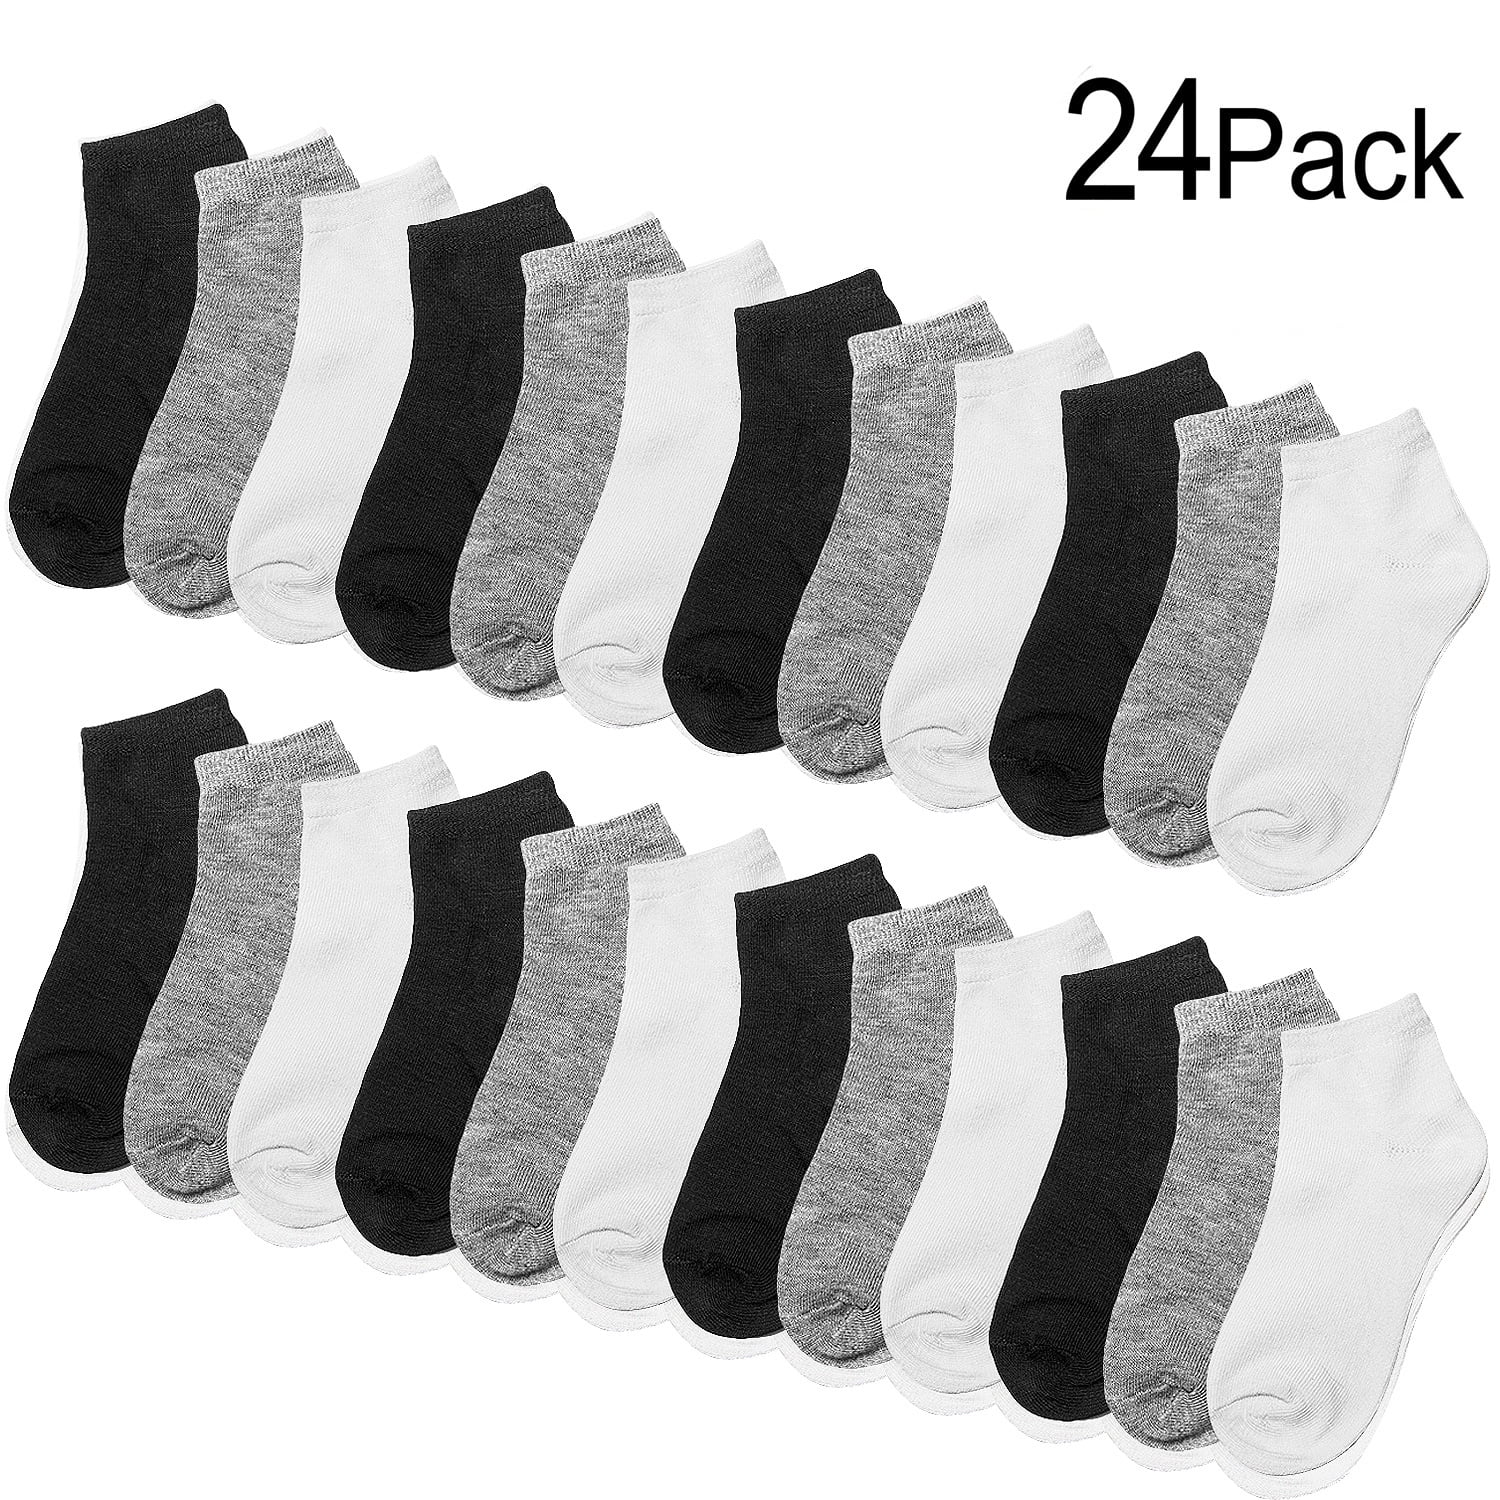 BNWT Boys Perfect Sports Brand Ankle Socks Pack of 5 Size 9-12 Age 5-8 Years 